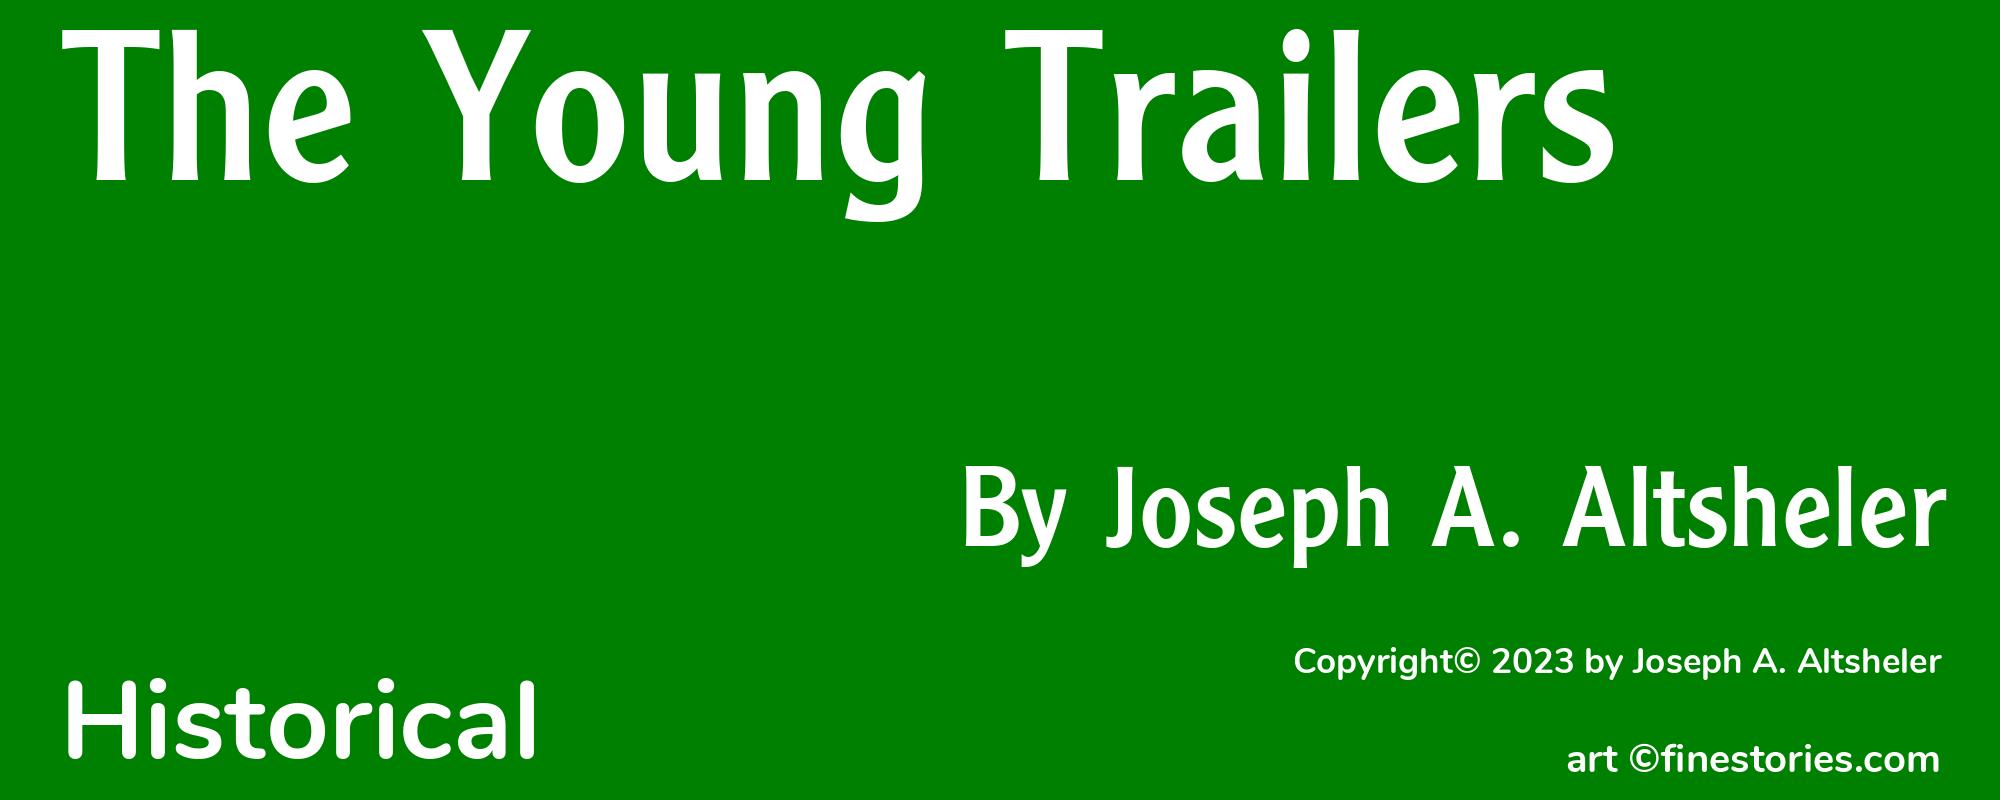 The Young Trailers - Cover